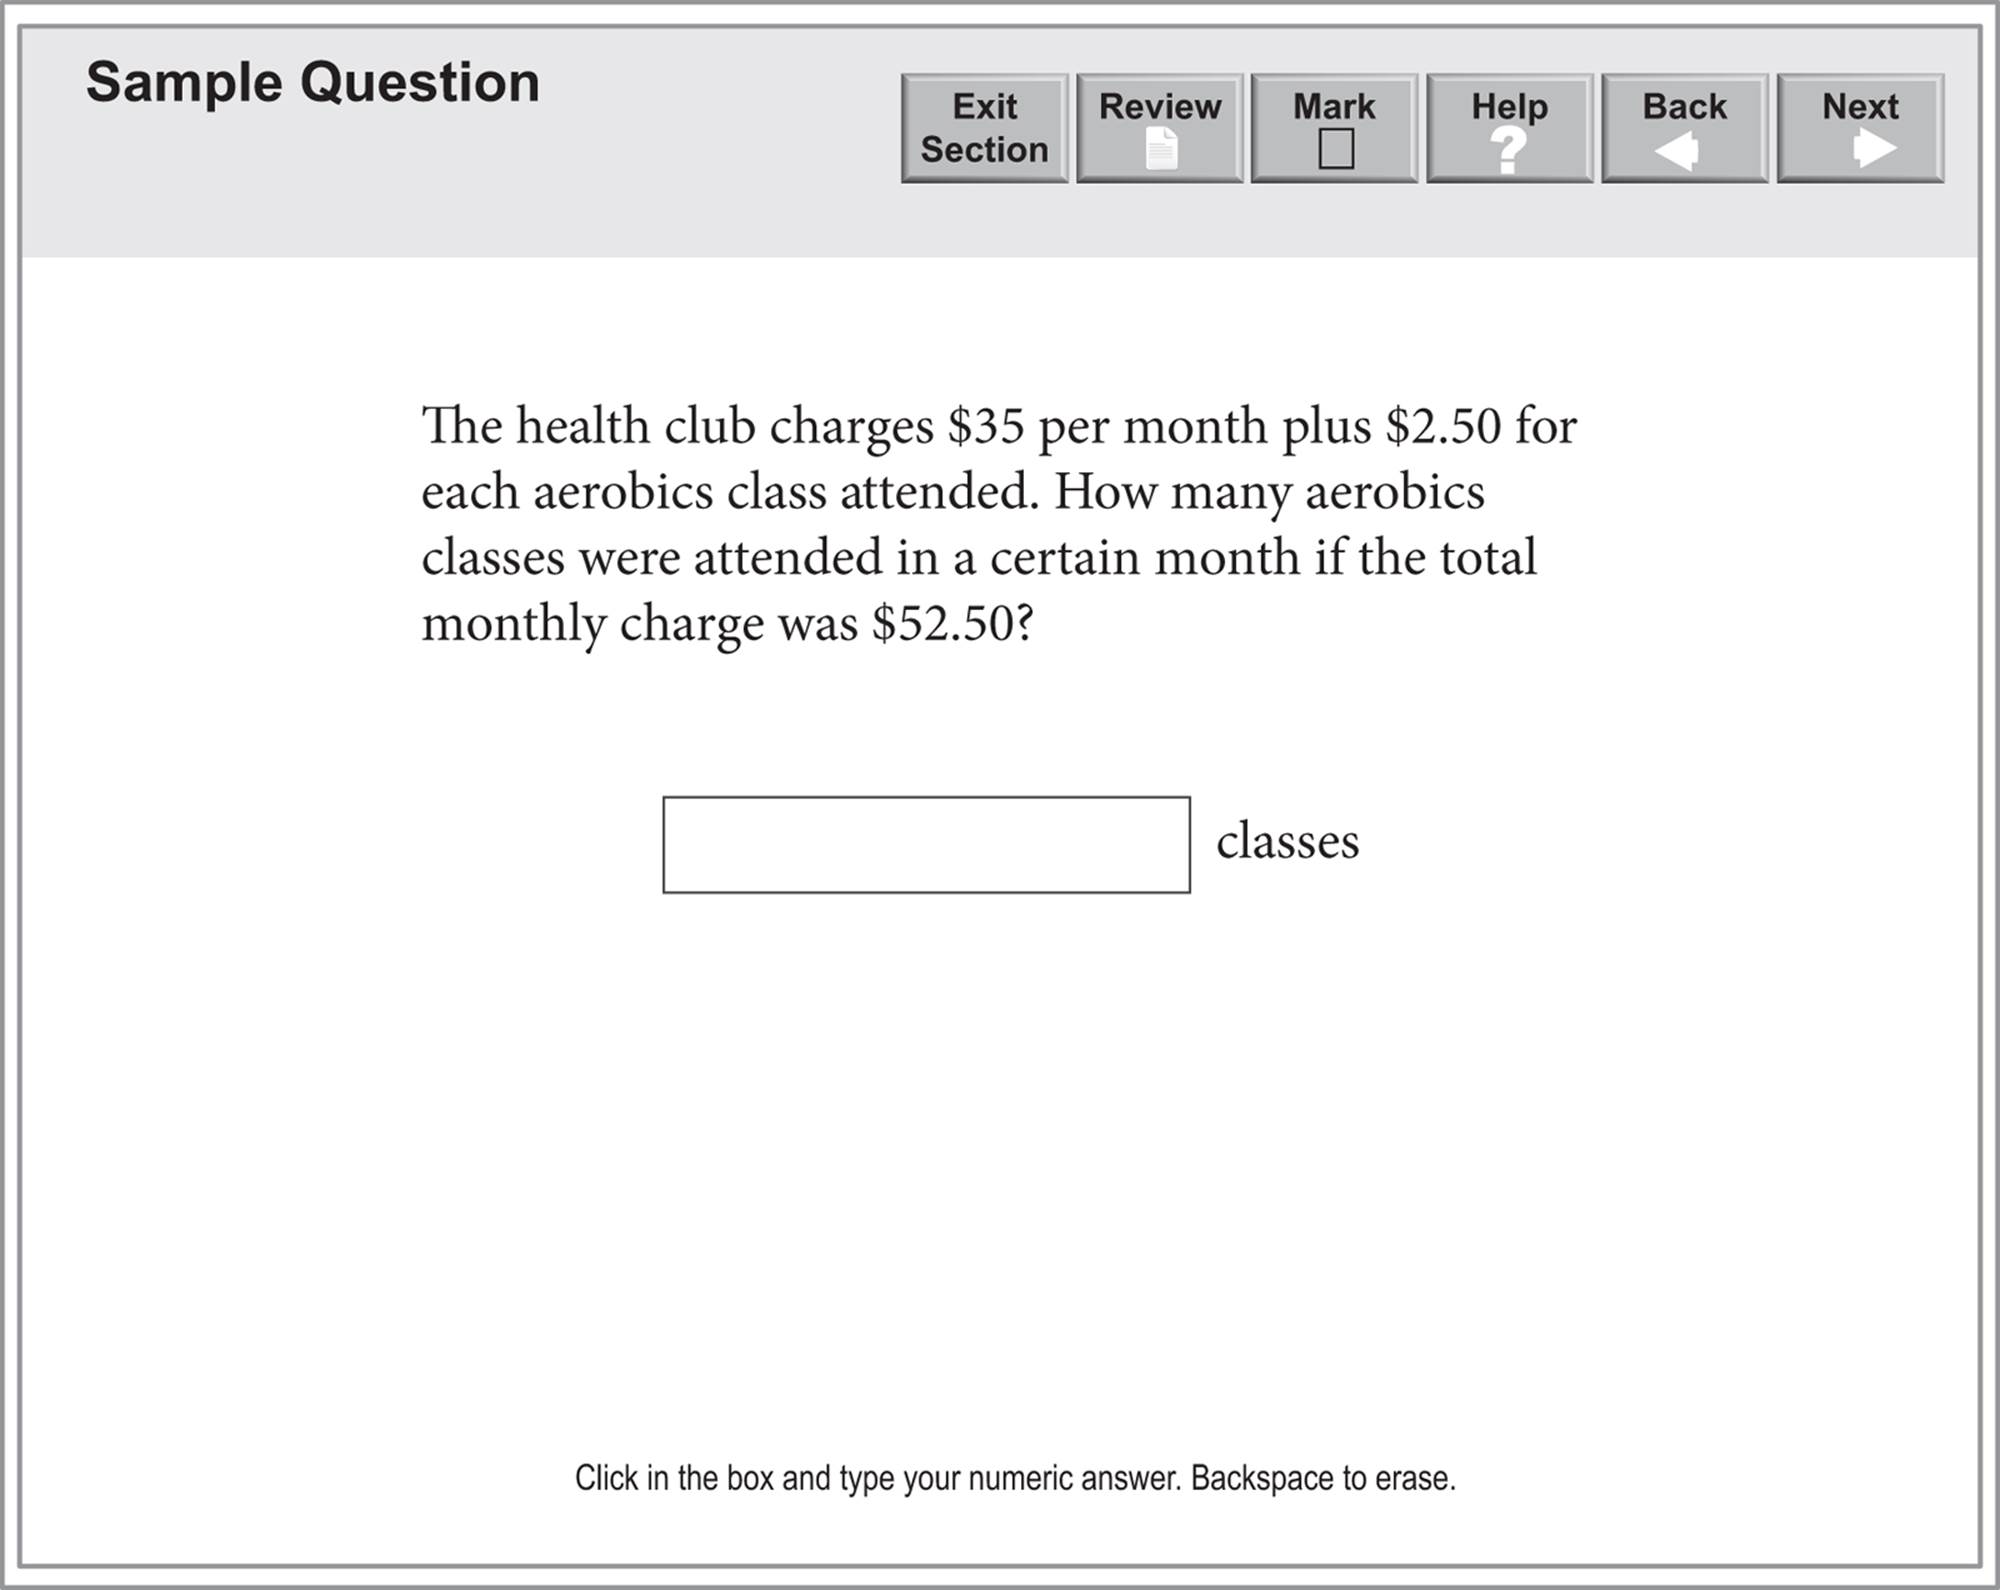 A problem solving question: "The health club charges $35 per month plus $2.50 for each aerobics class attended. How many aerobics classes were attended in a certain month if the total monthly charges was $52.50?" For the answer, there is a blank box before the word classes.